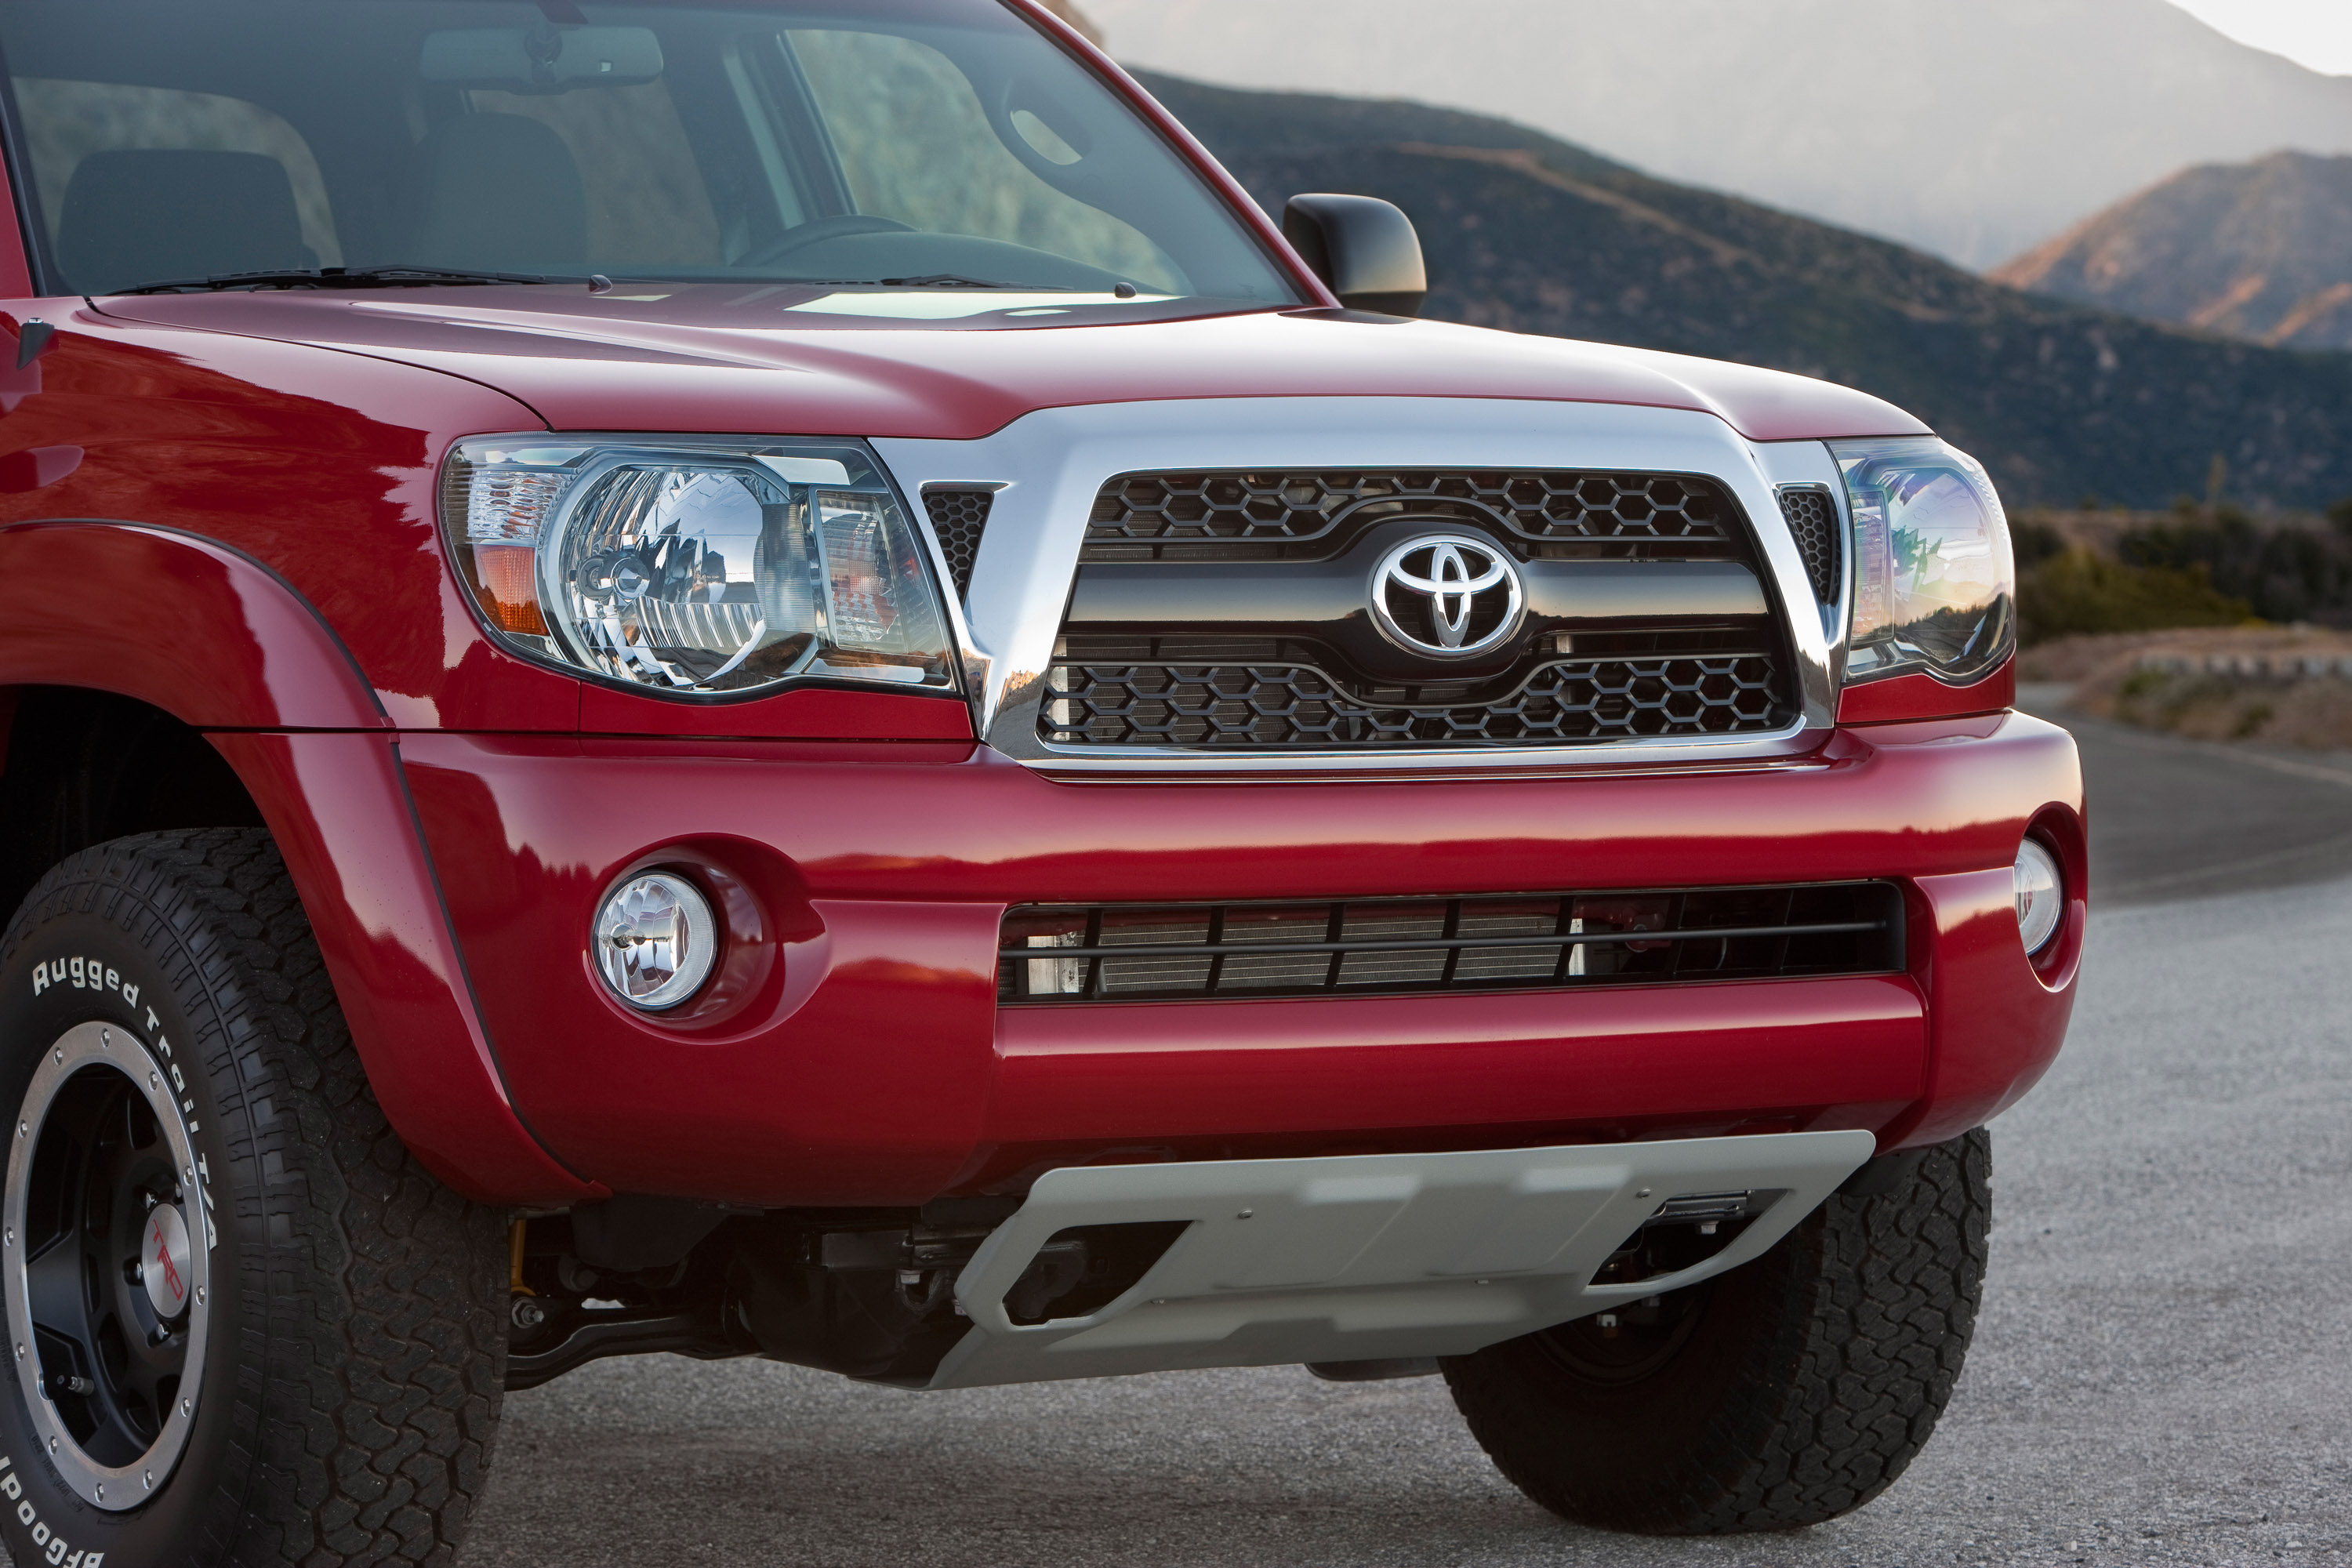 2011 Toyota Tacoma gets TRD TX and TX Pro packages